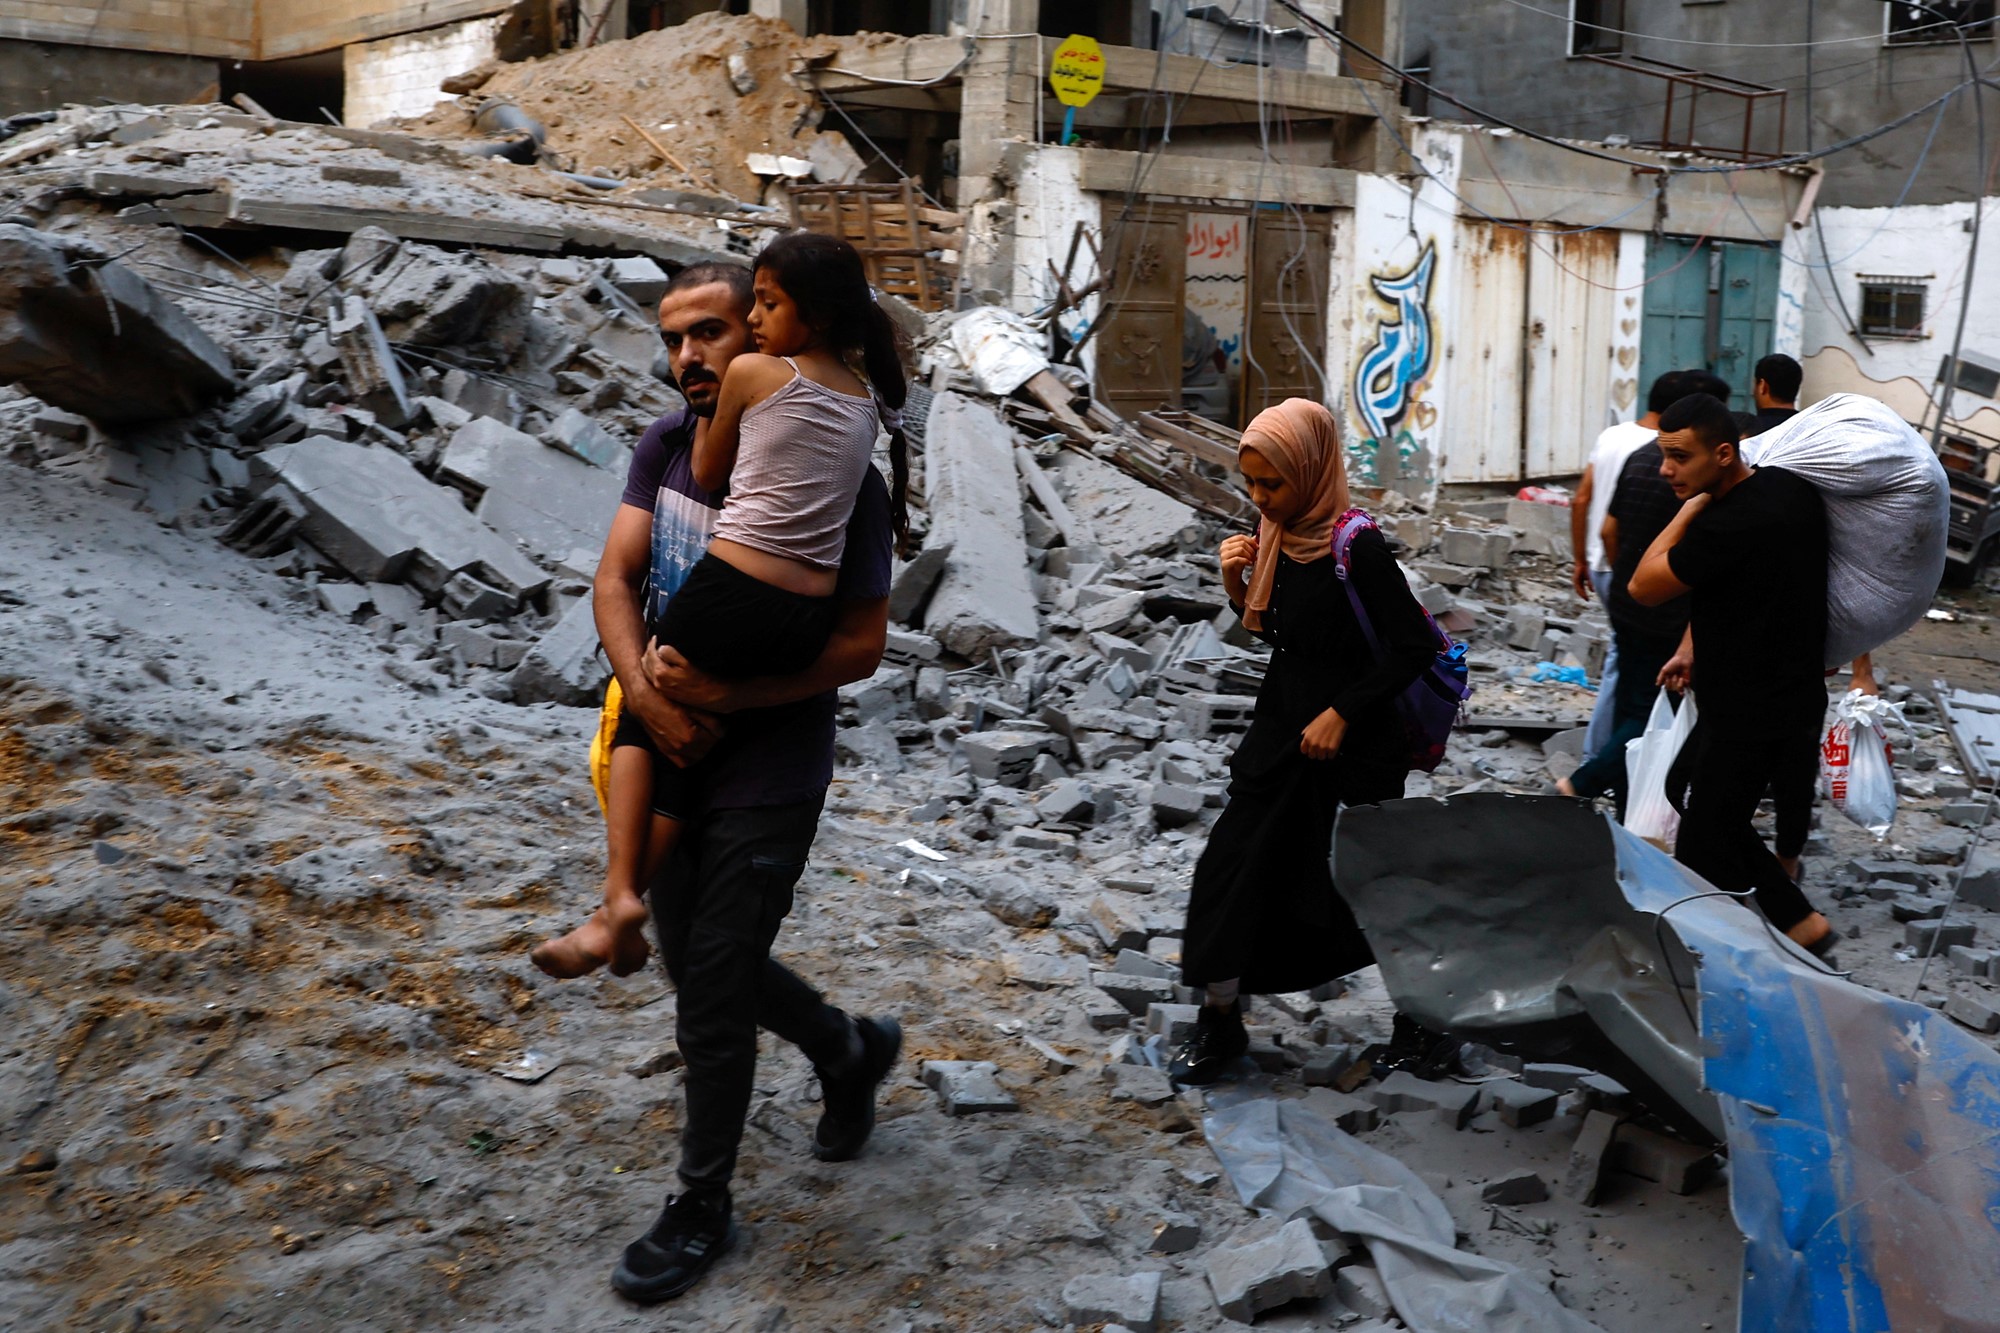 A man carrying a child and two women walk through a destroyed street